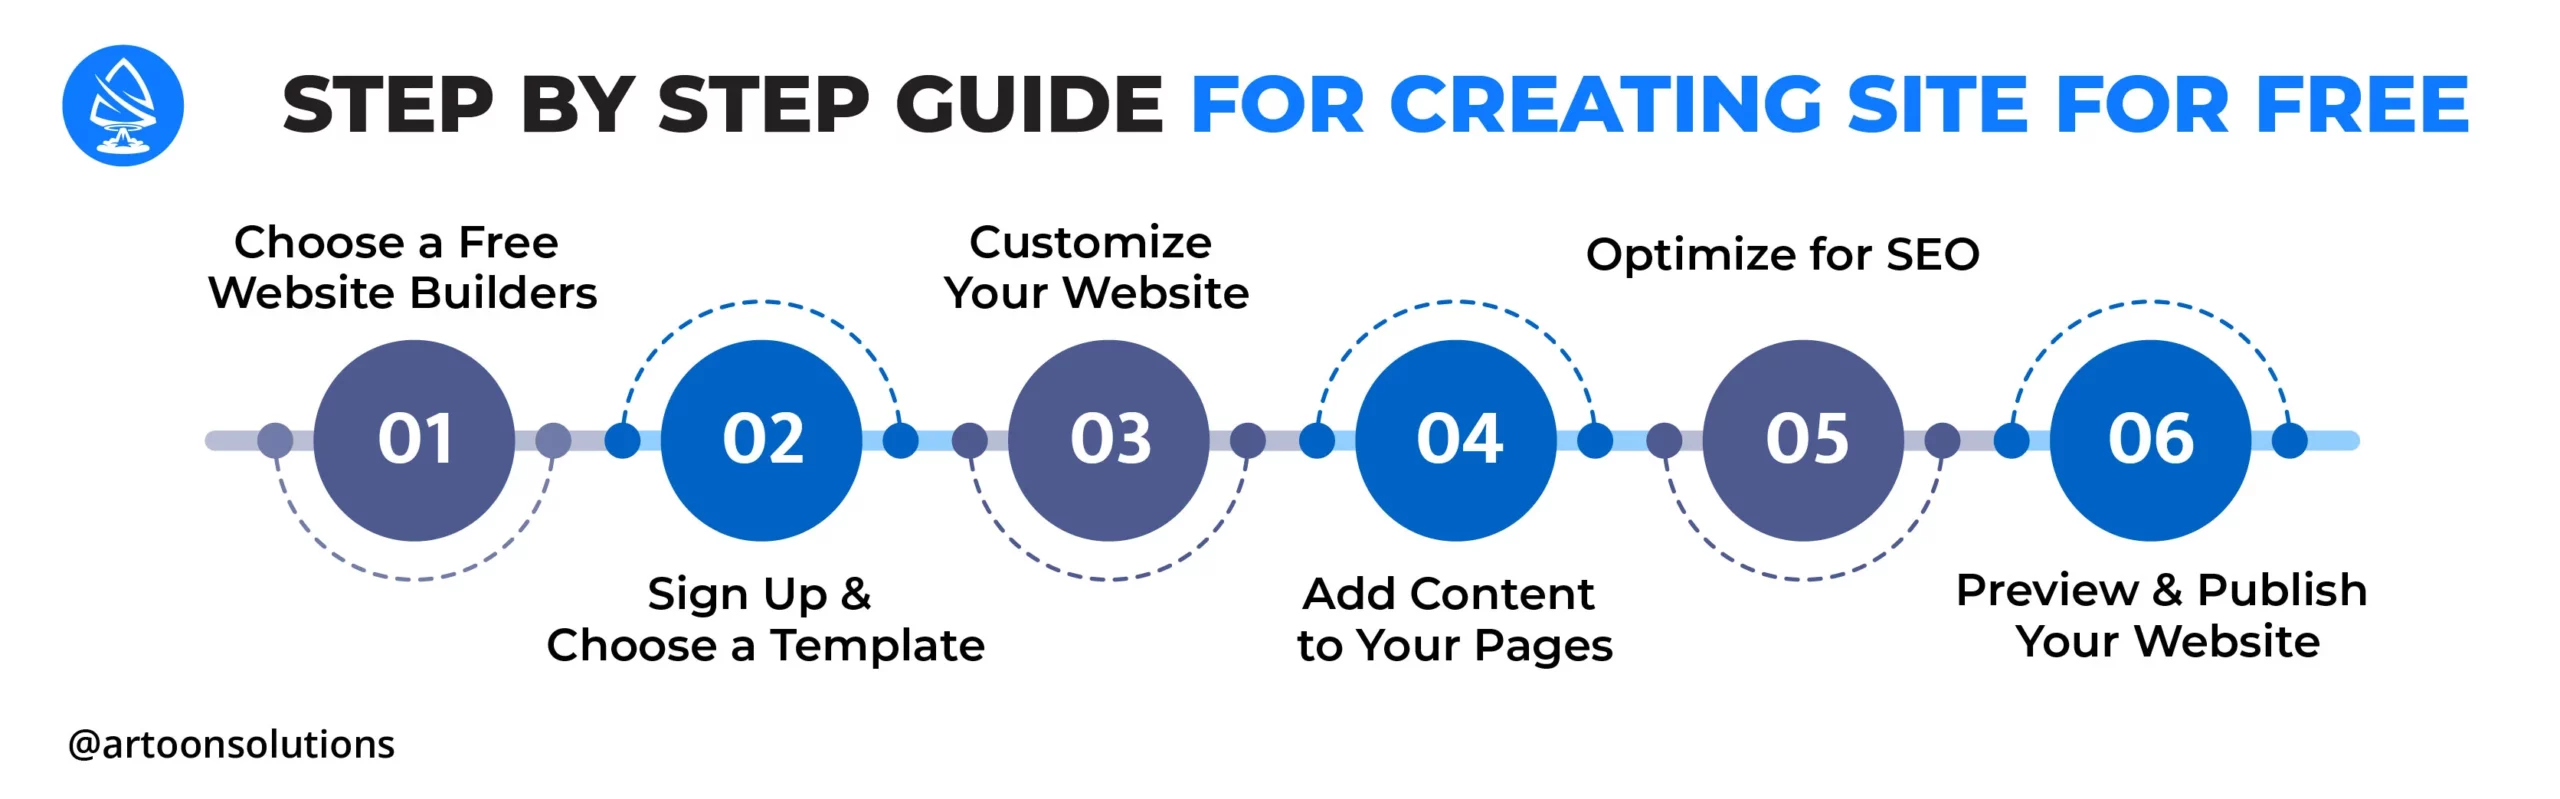 How to Create a Website for Free: Step-by-Step Guide 